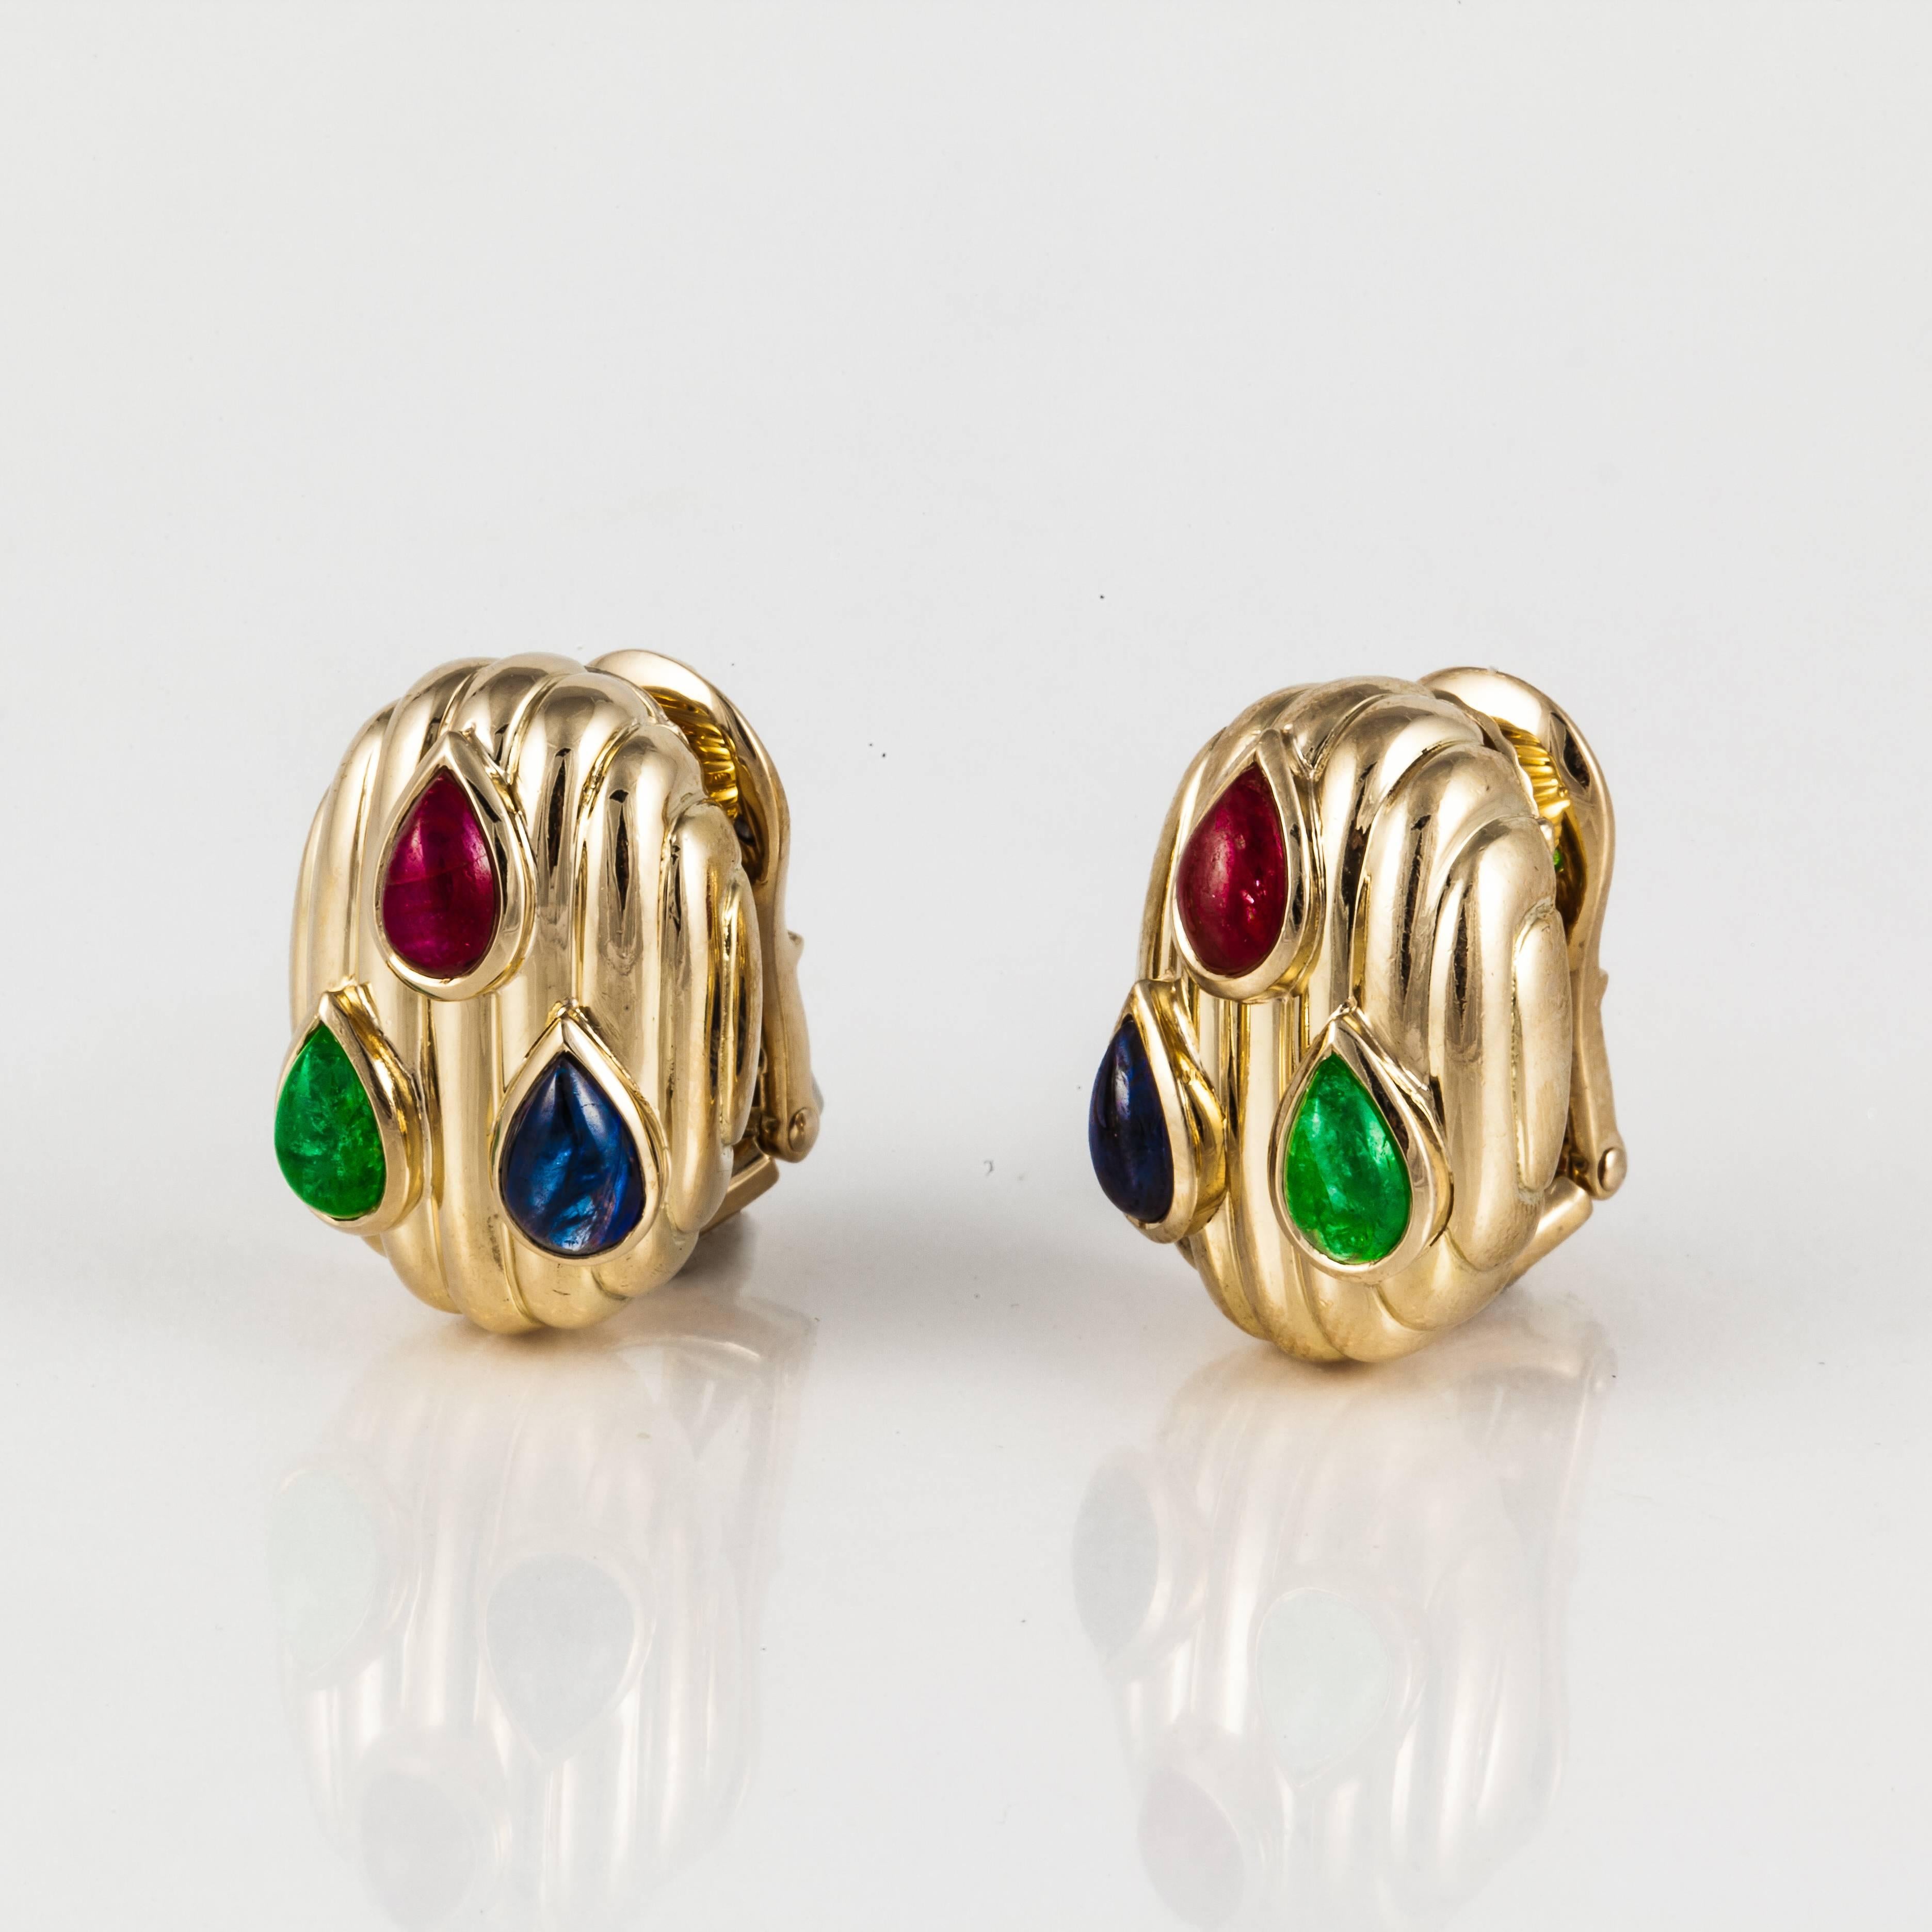 David Webb earrings in 18K yellow gold featuring cabochon emeralds, rubies and sapphires.  They measure 13/16 inches long and 9/16 inches wide.  Clip style.